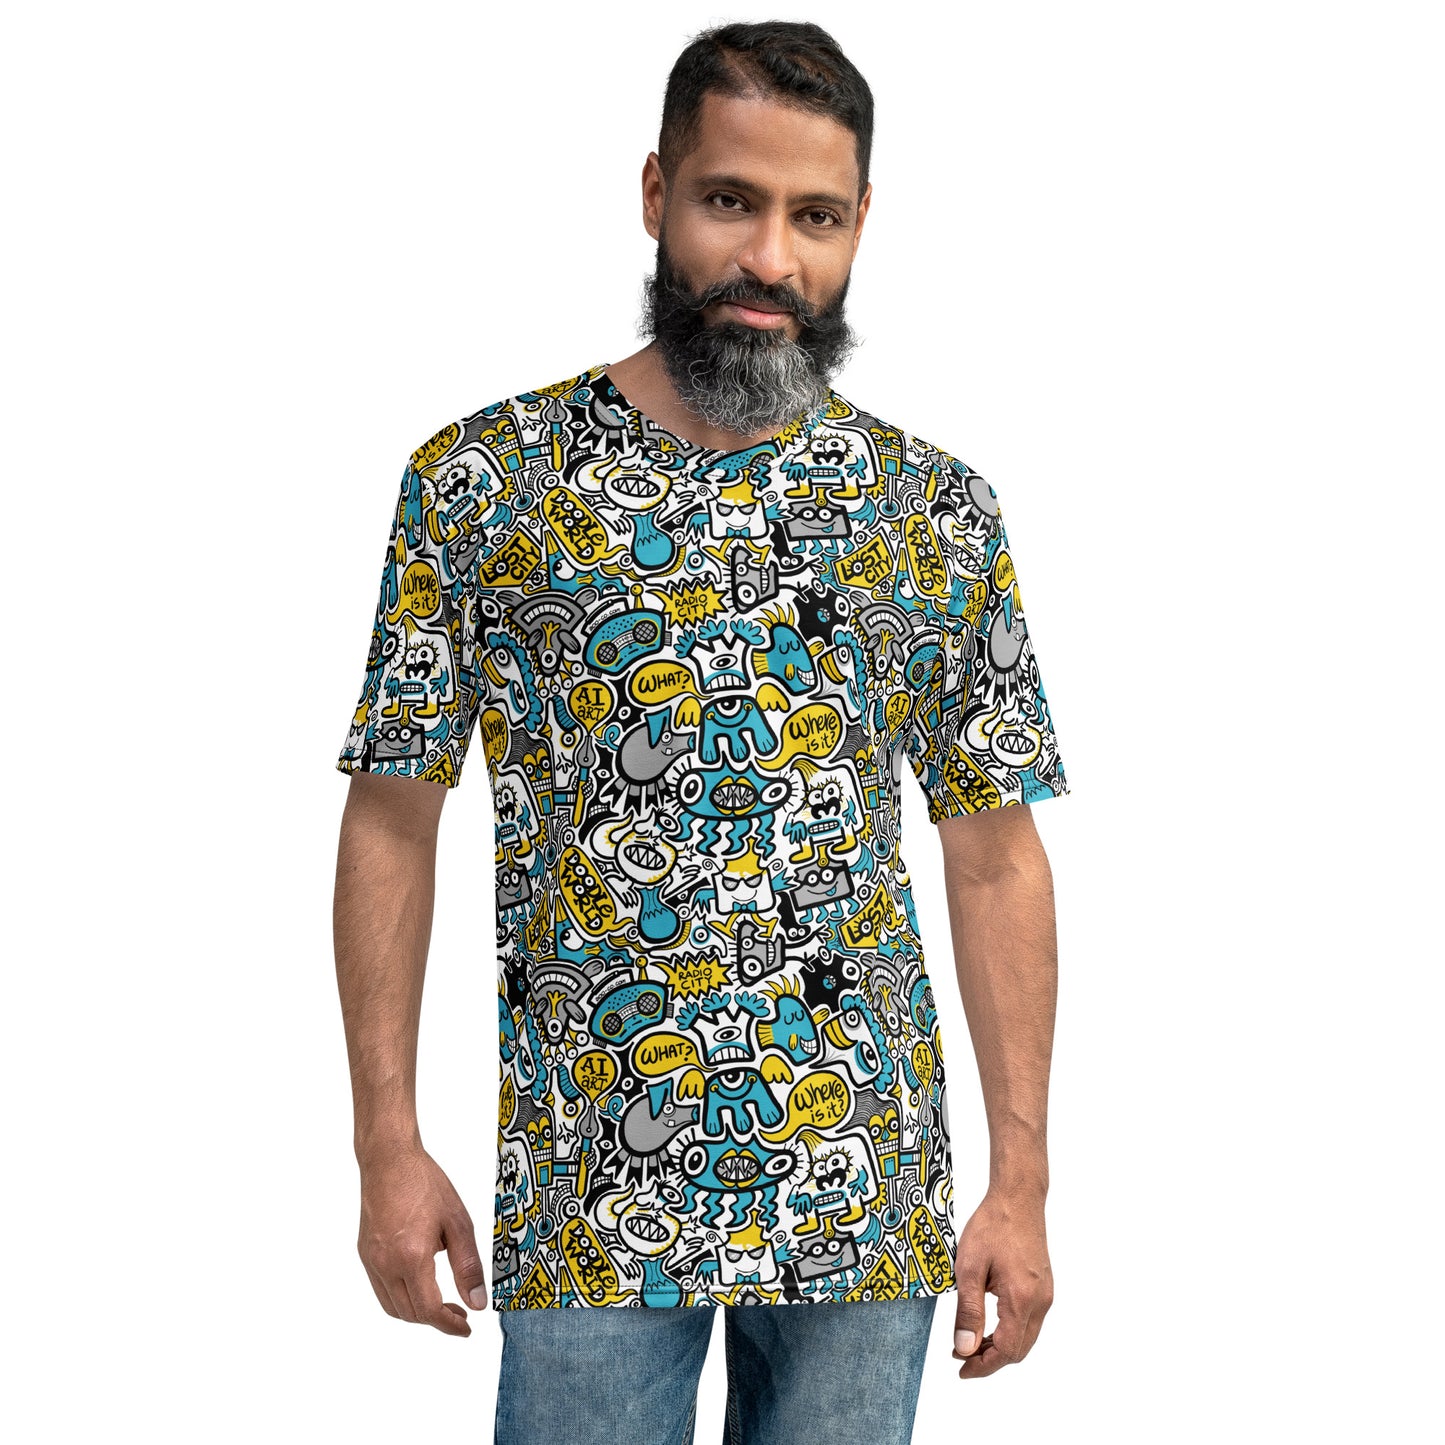 Discover a whole Doodle world in Lost city All-over print Men's t-shirt. Front view